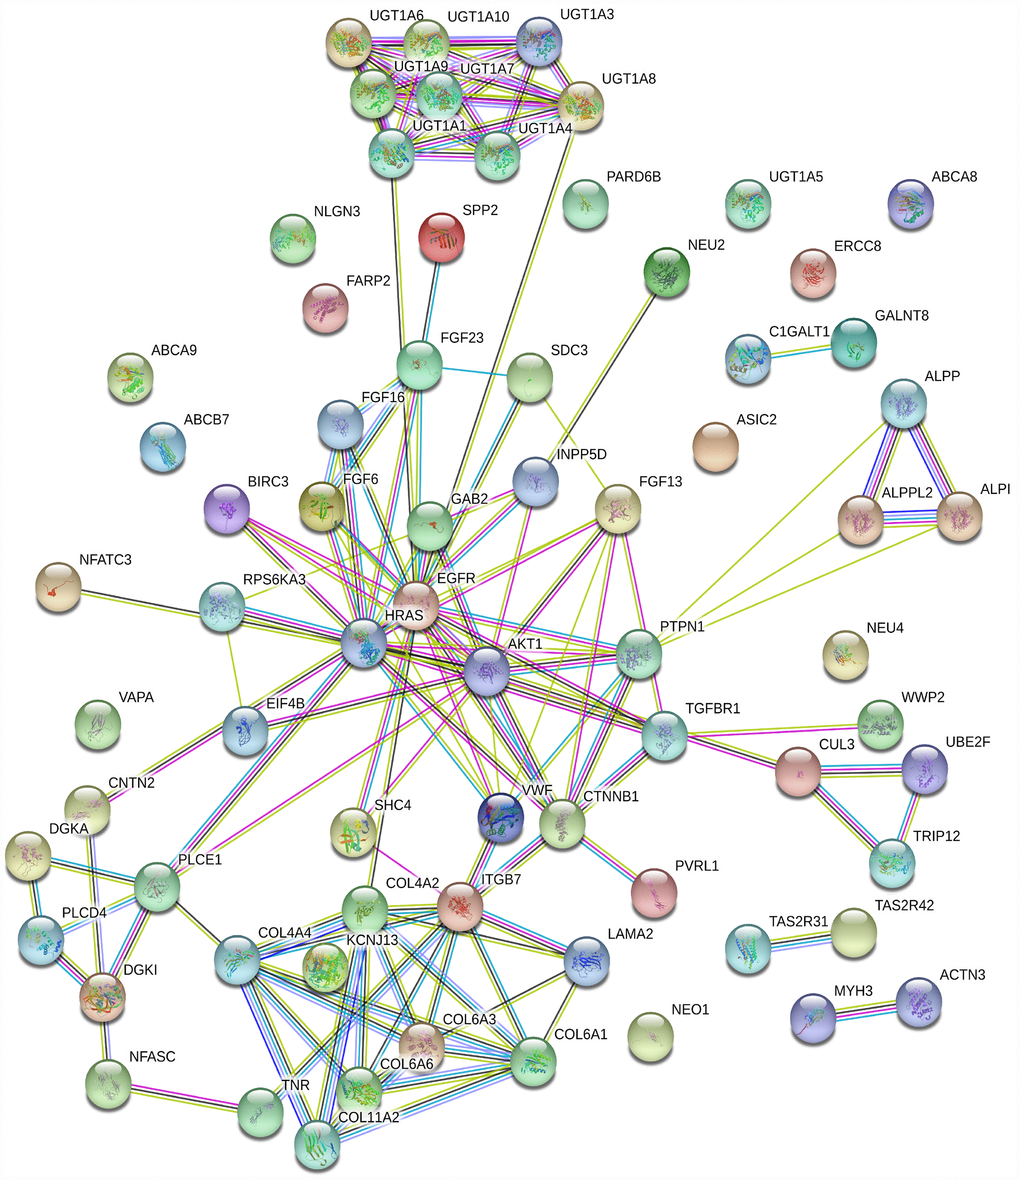 PPI network based on 71 genes. There are 54 nodes and 112 edges in the network. Nodes represent genes, and edges represent the interactions between genes.